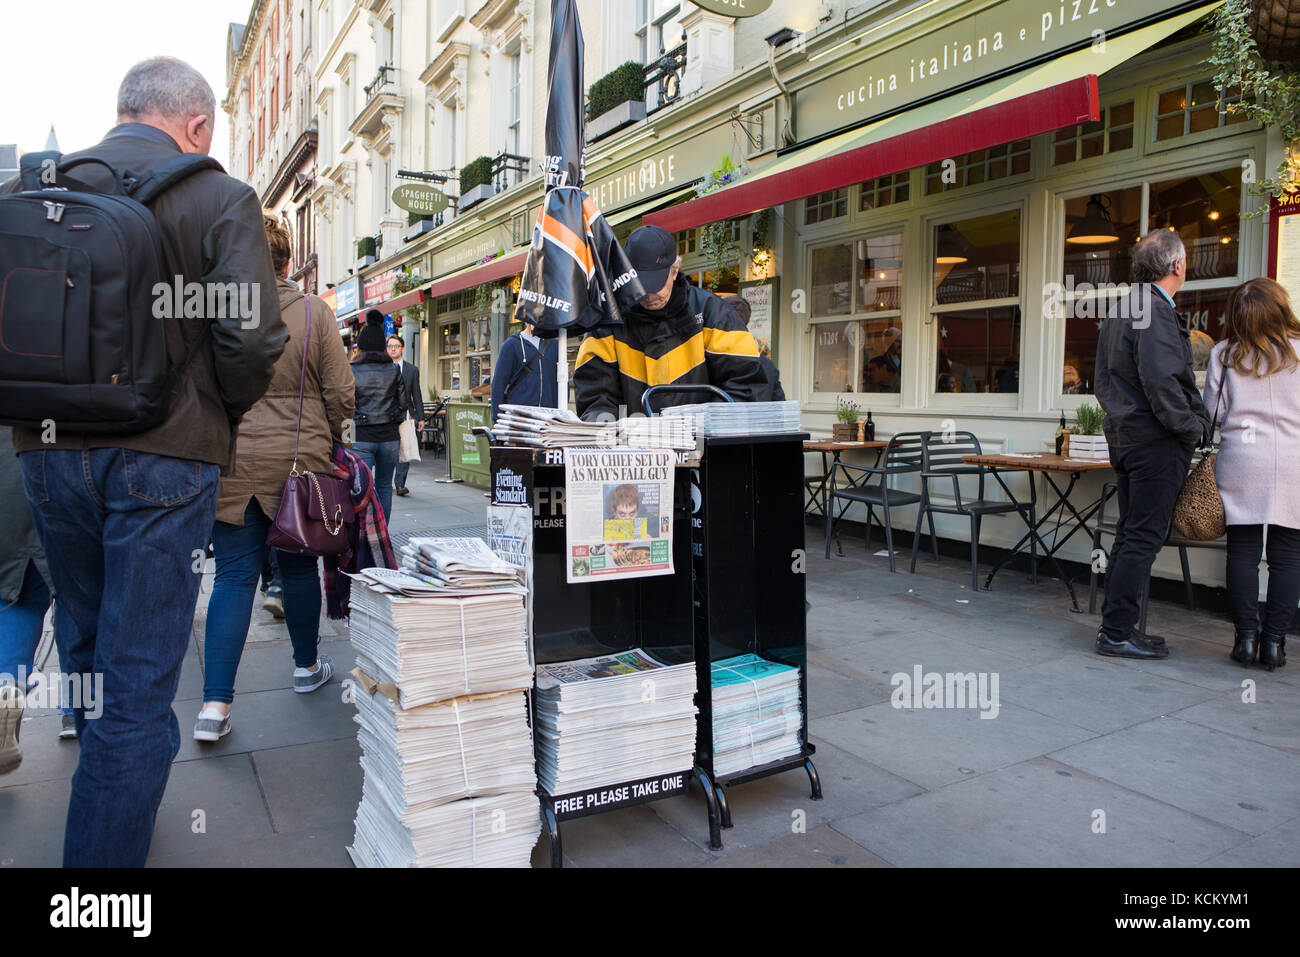 Newspaper vendor distributing free copies of the Evening Standard at a  street stand, London, England, UK Stock Photo